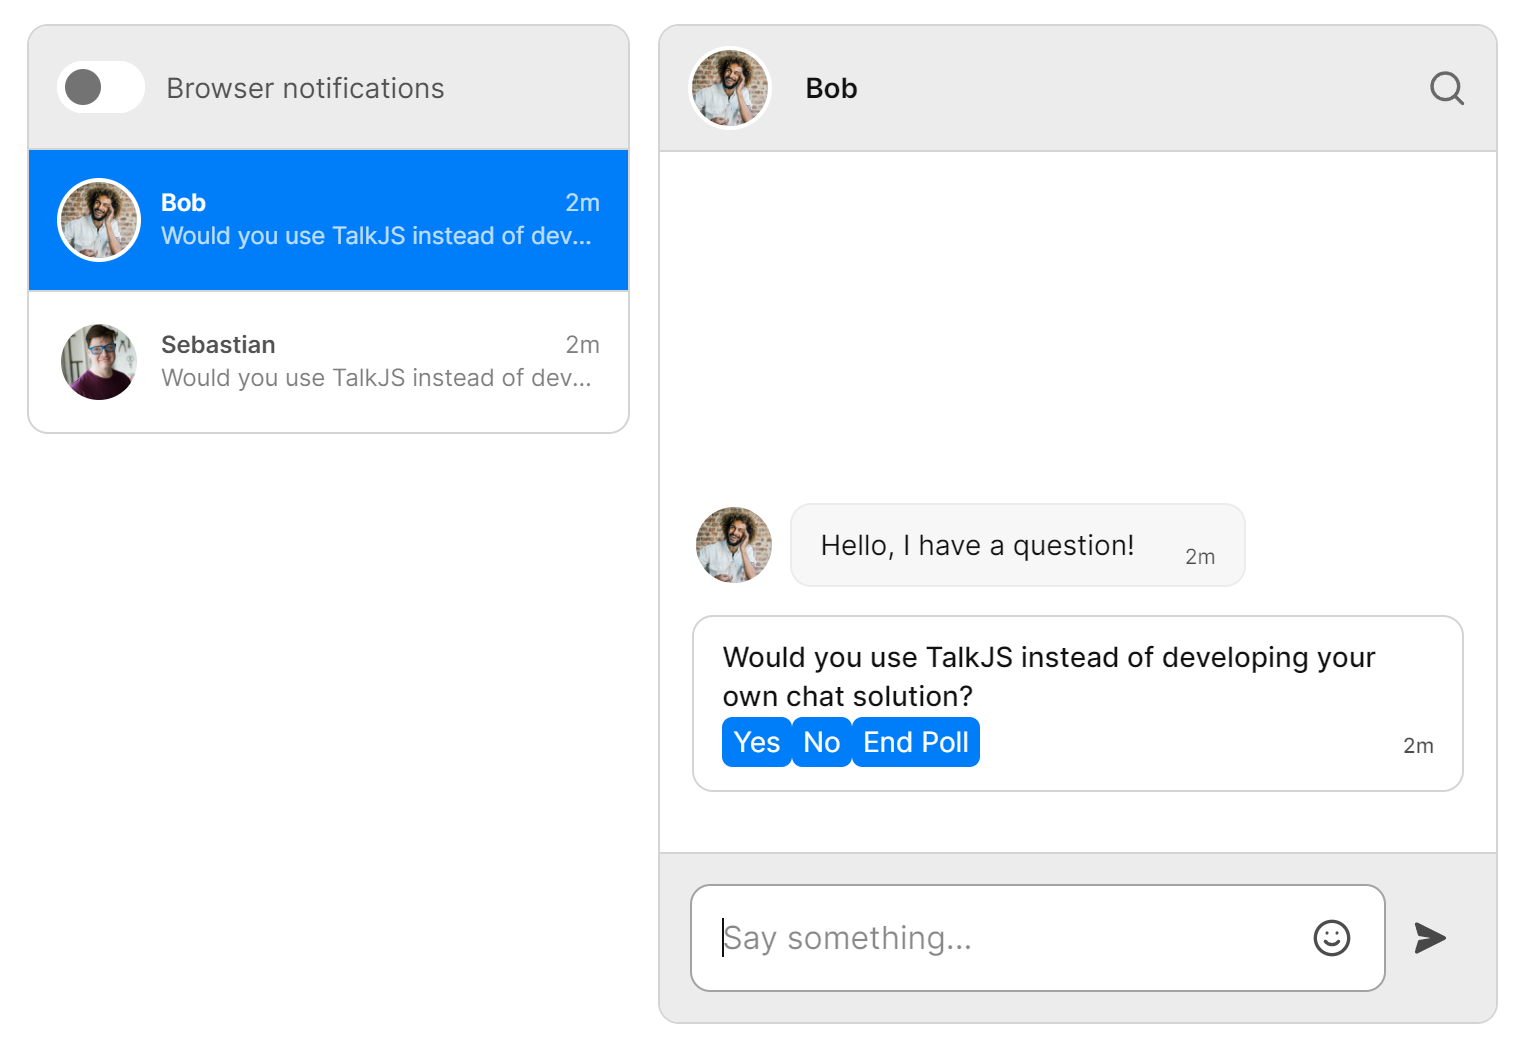 How to create a poll in TalkJS